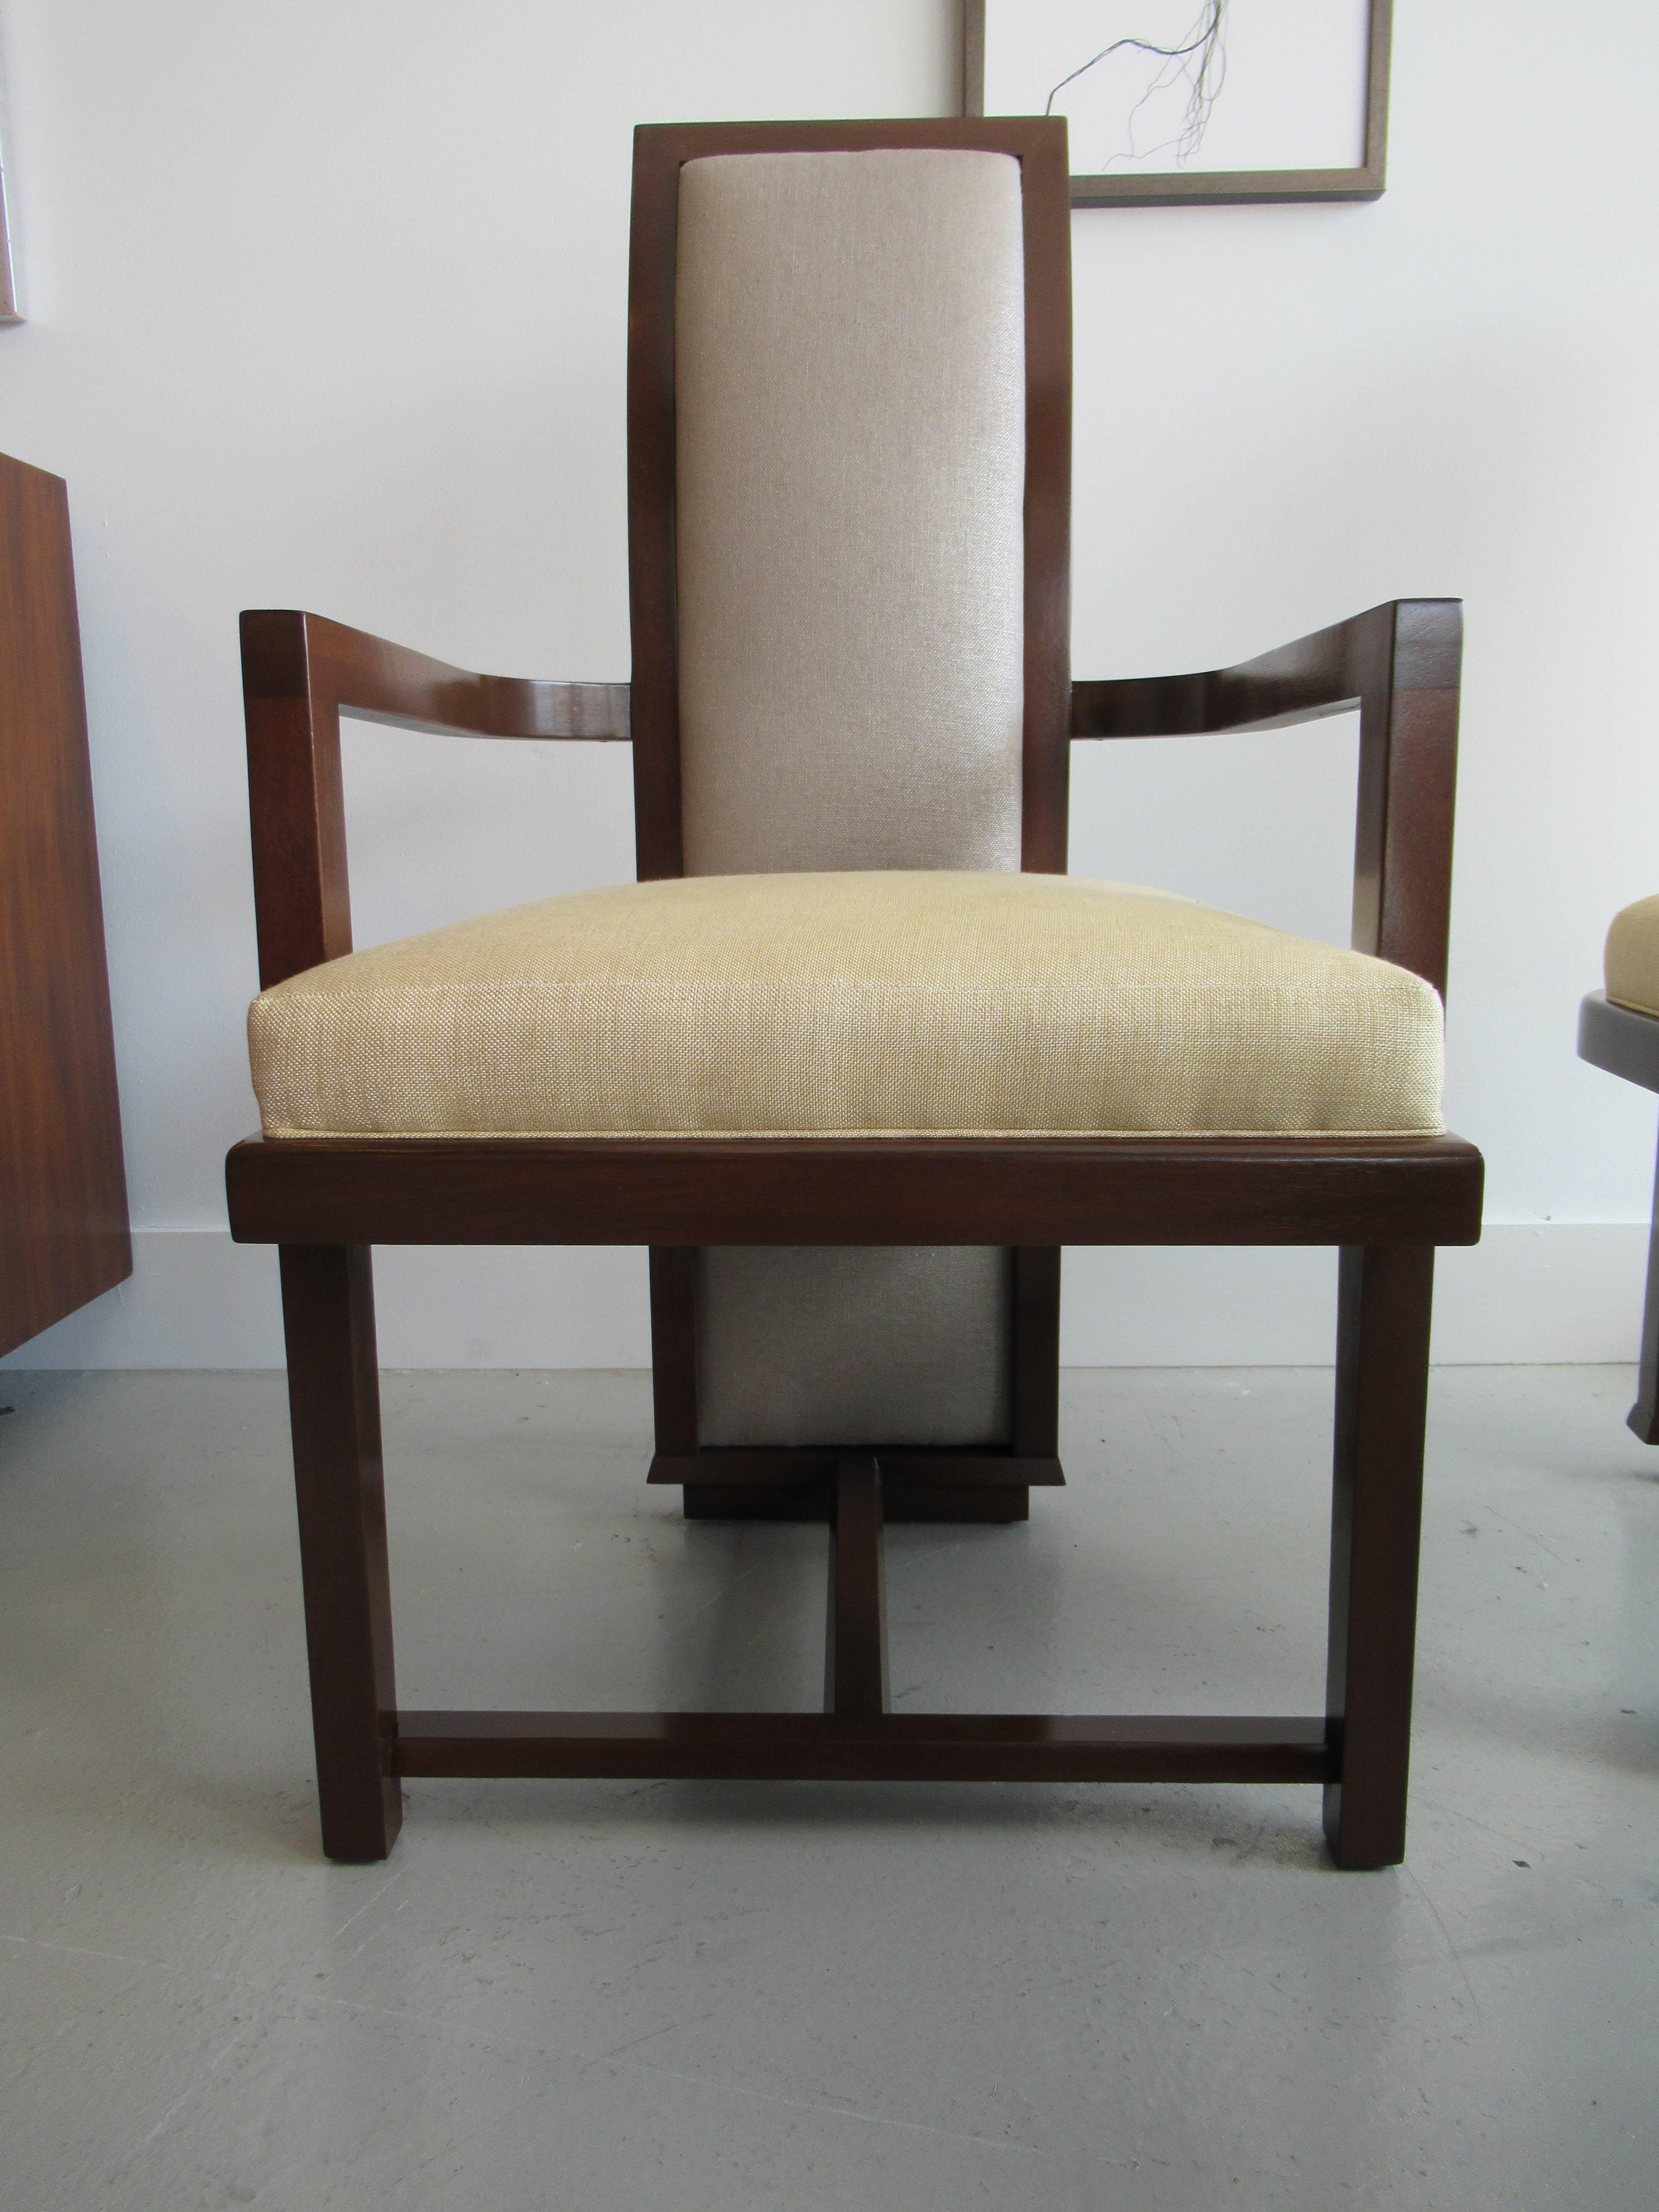 Set of 12 Frank Lloyd Wright Taliesin Collection Mahogany Dining Chairs In Excellent Condition For Sale In Hollywood, FL